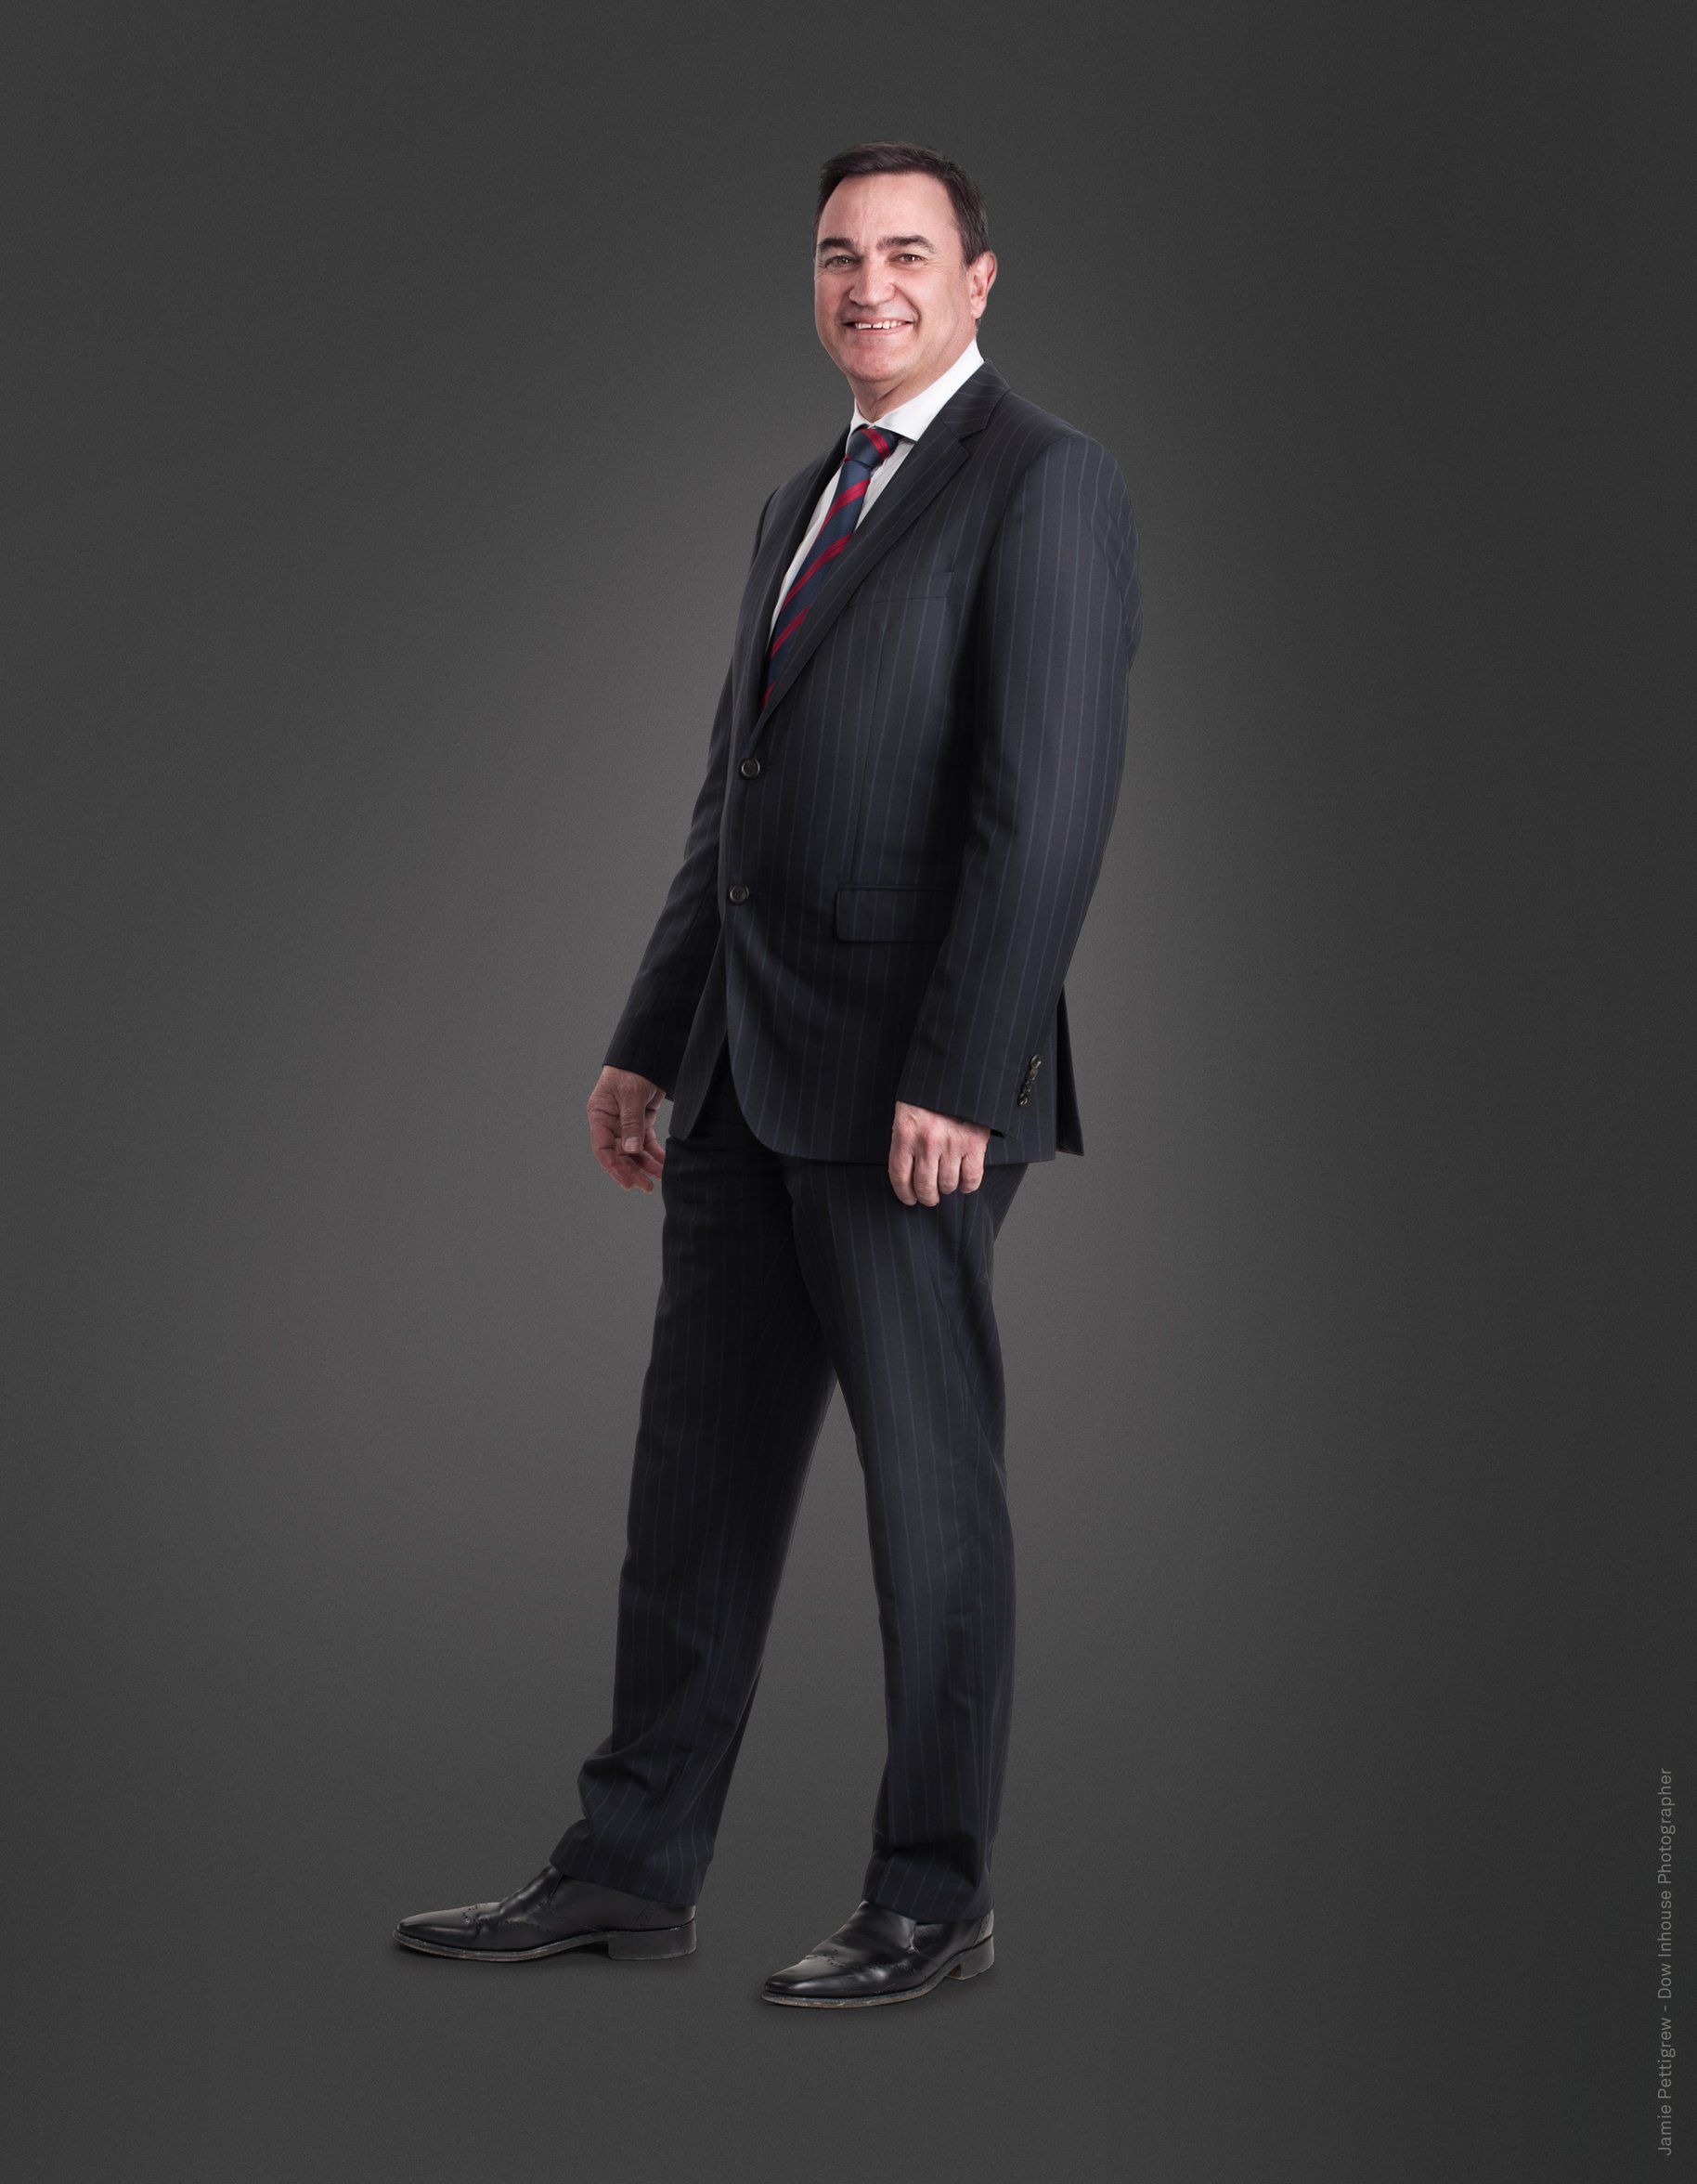 Craigs Investment Partners staff portrait photography 